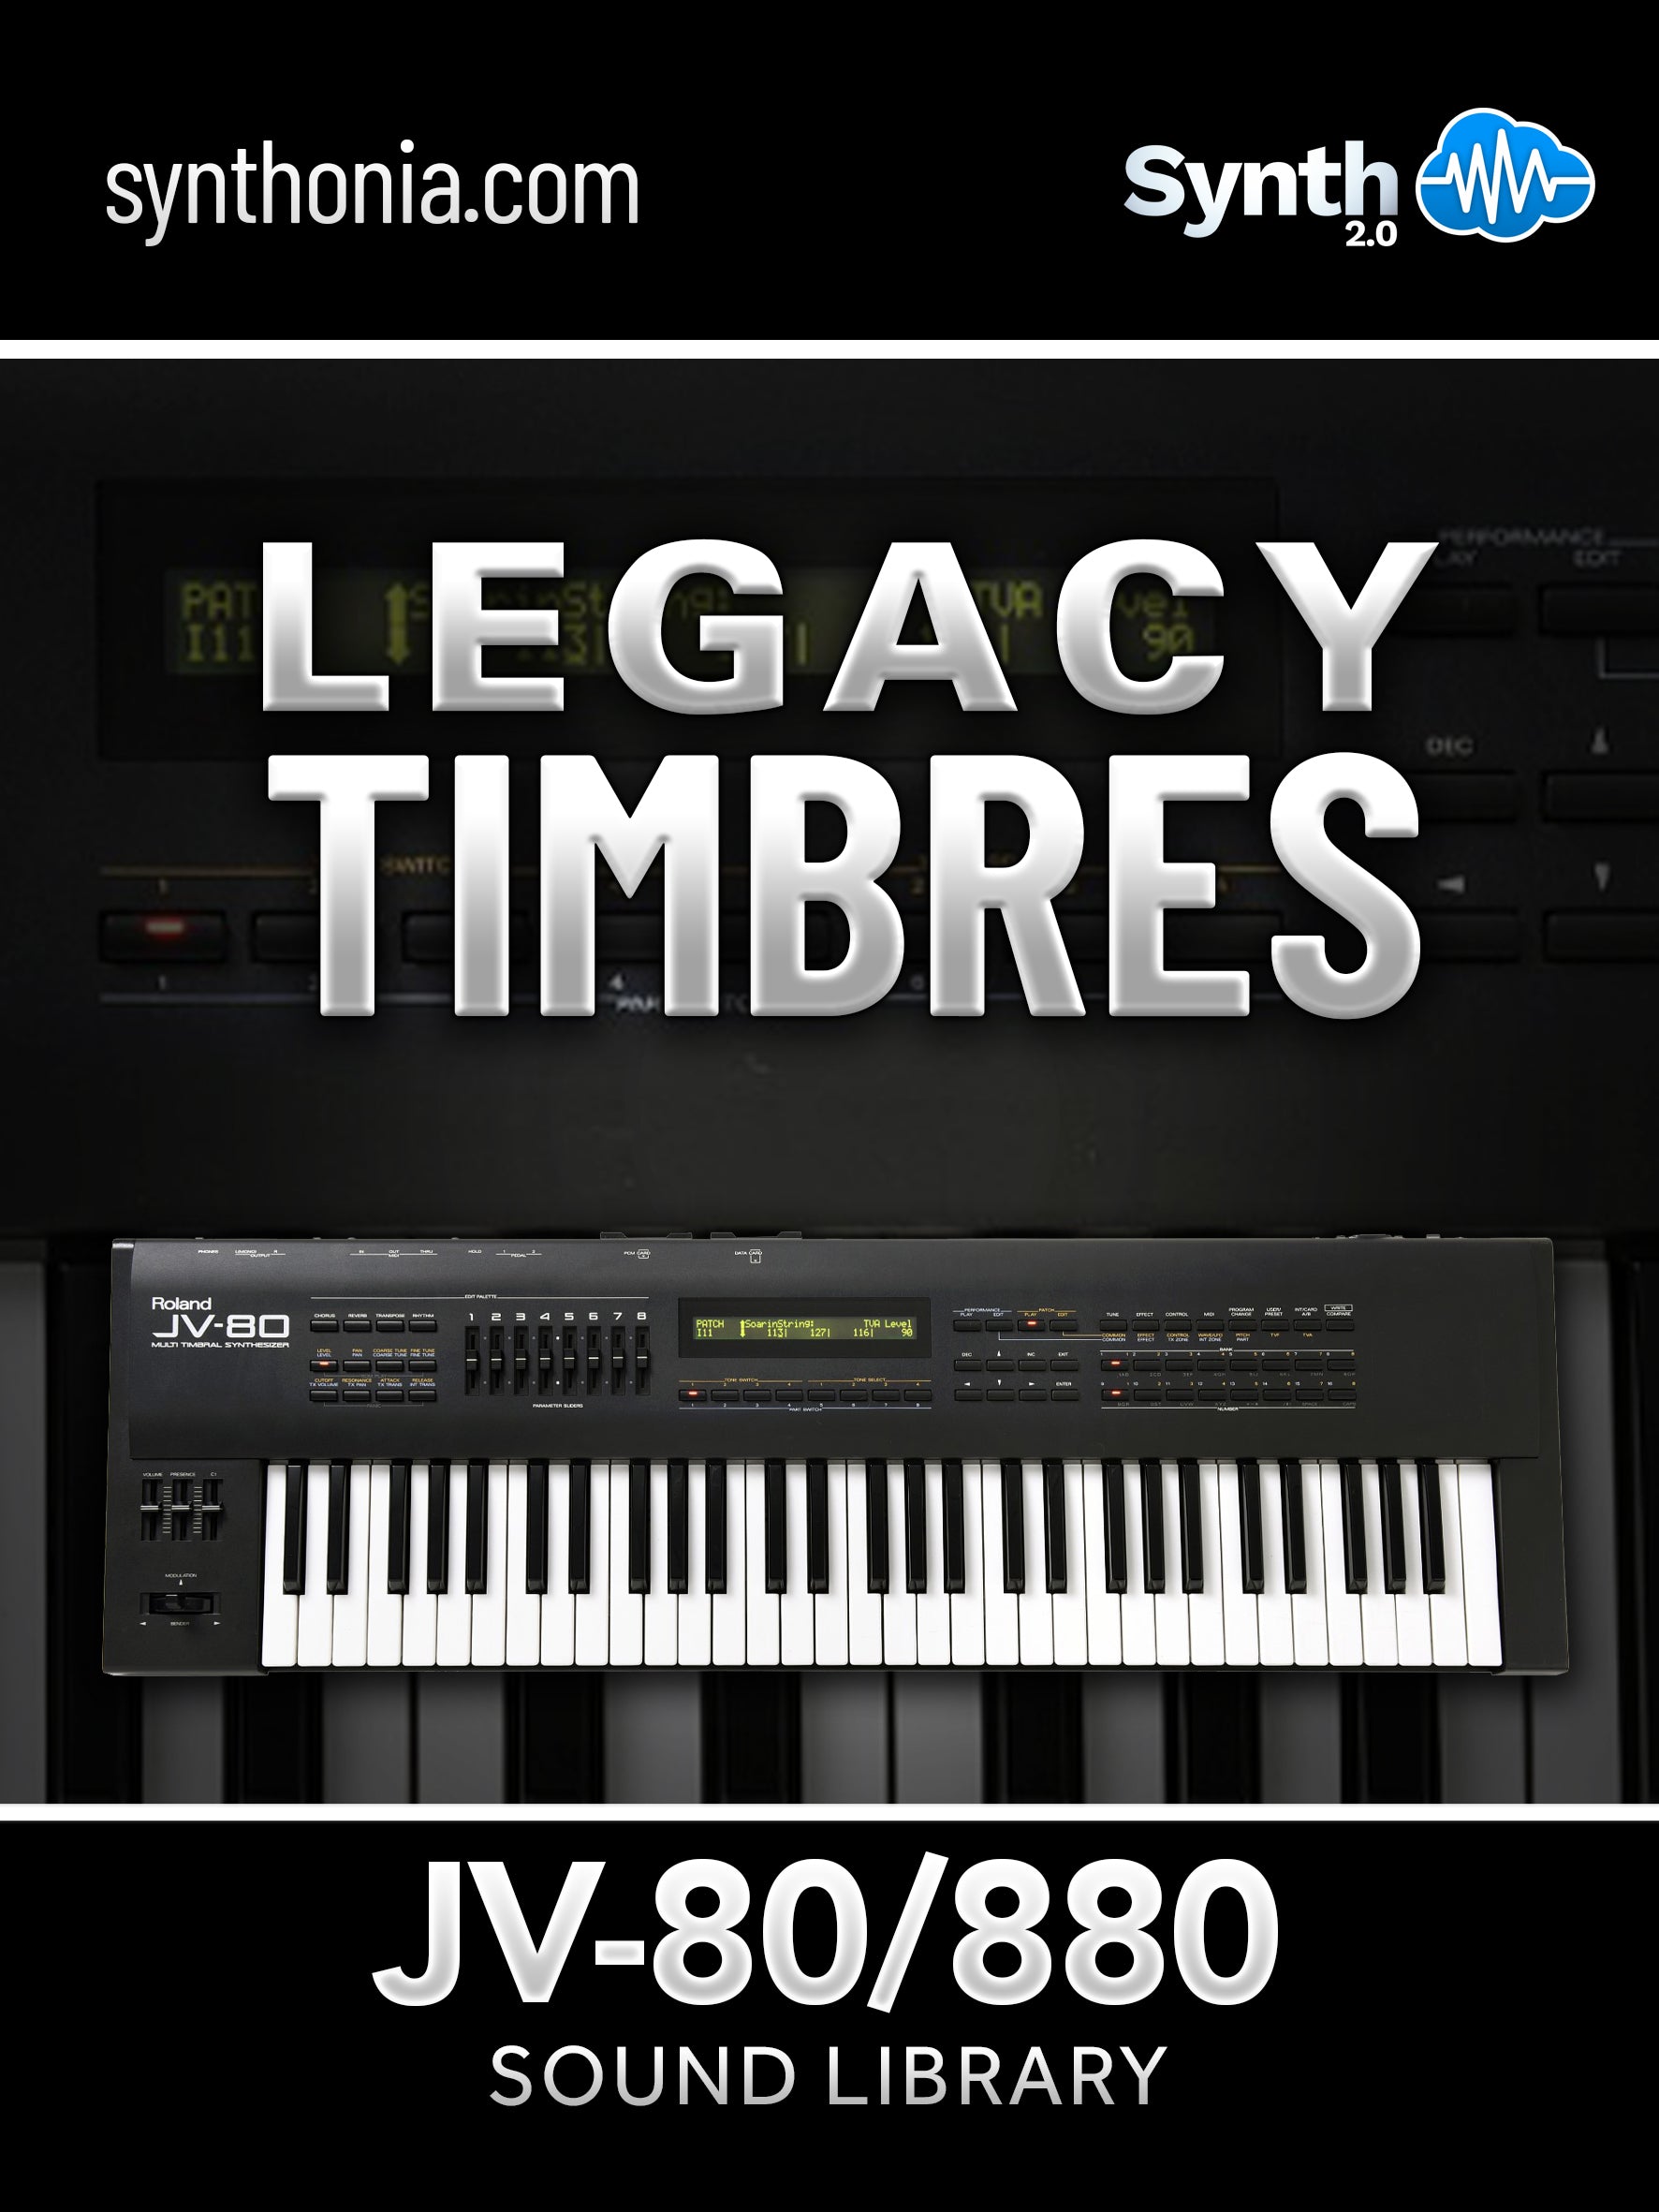 LFO049 - 64 Presets - Legacy Timbres - JV-80 / 880